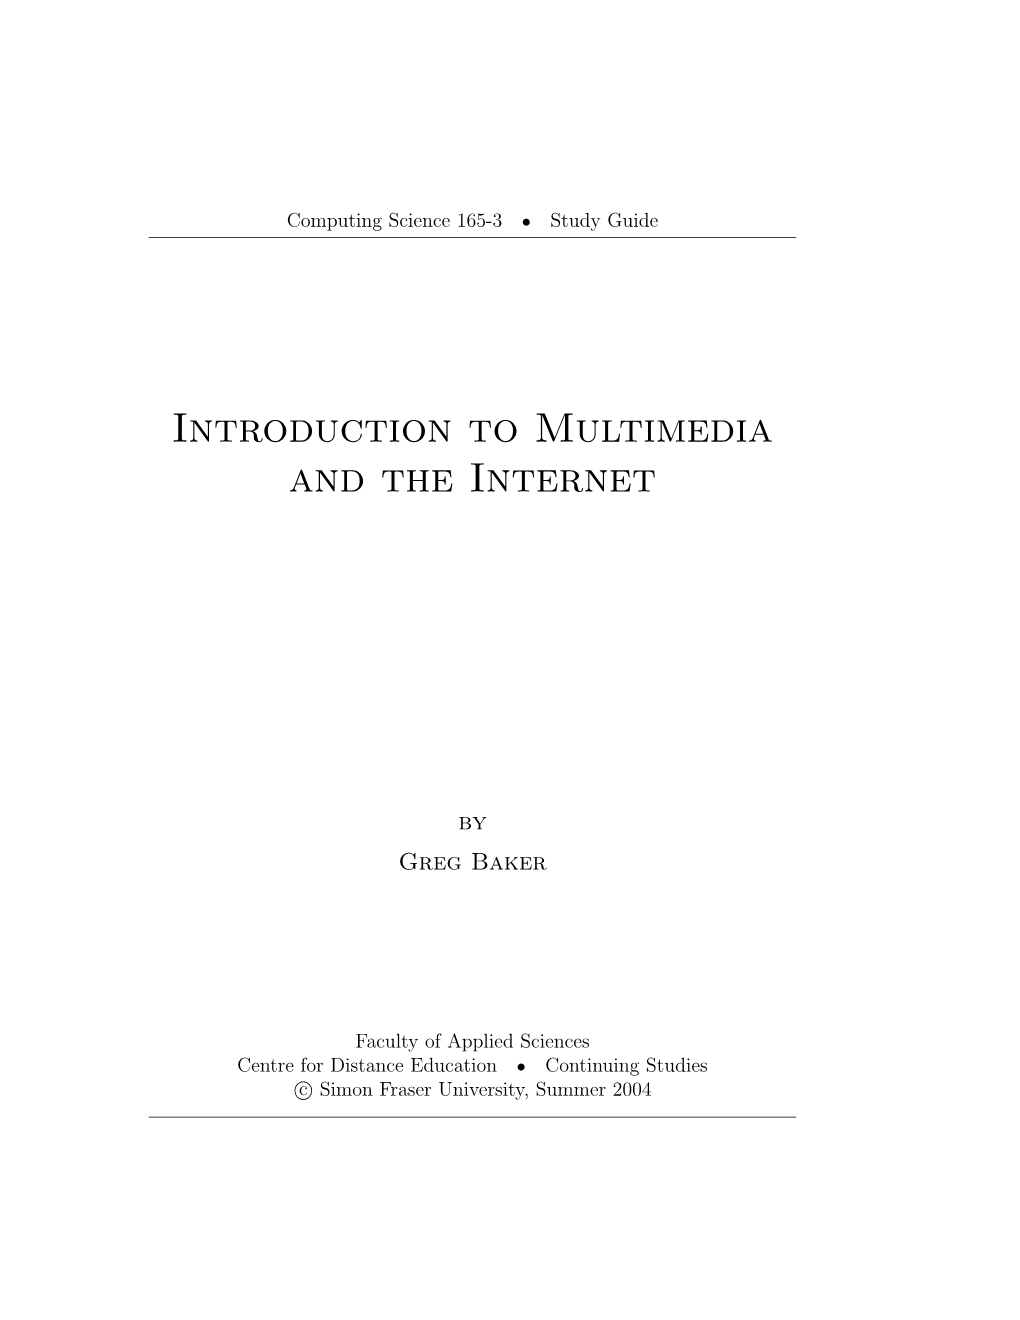 Introduction to Multimedia and the Internet